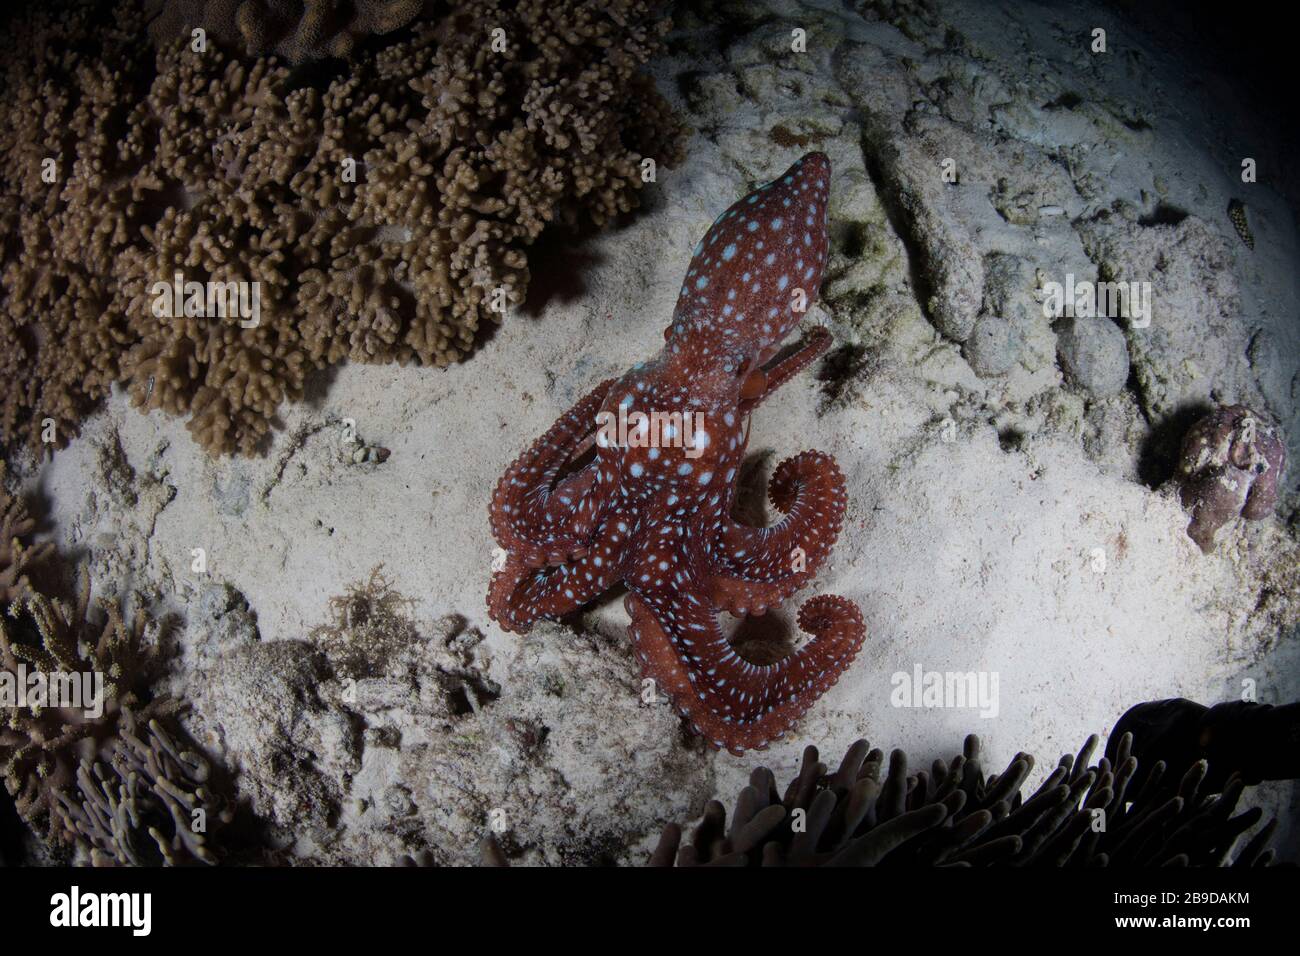 A starry night octopus, Callistoctopus luteus, searches for prey on a reef at night. Stock Photo